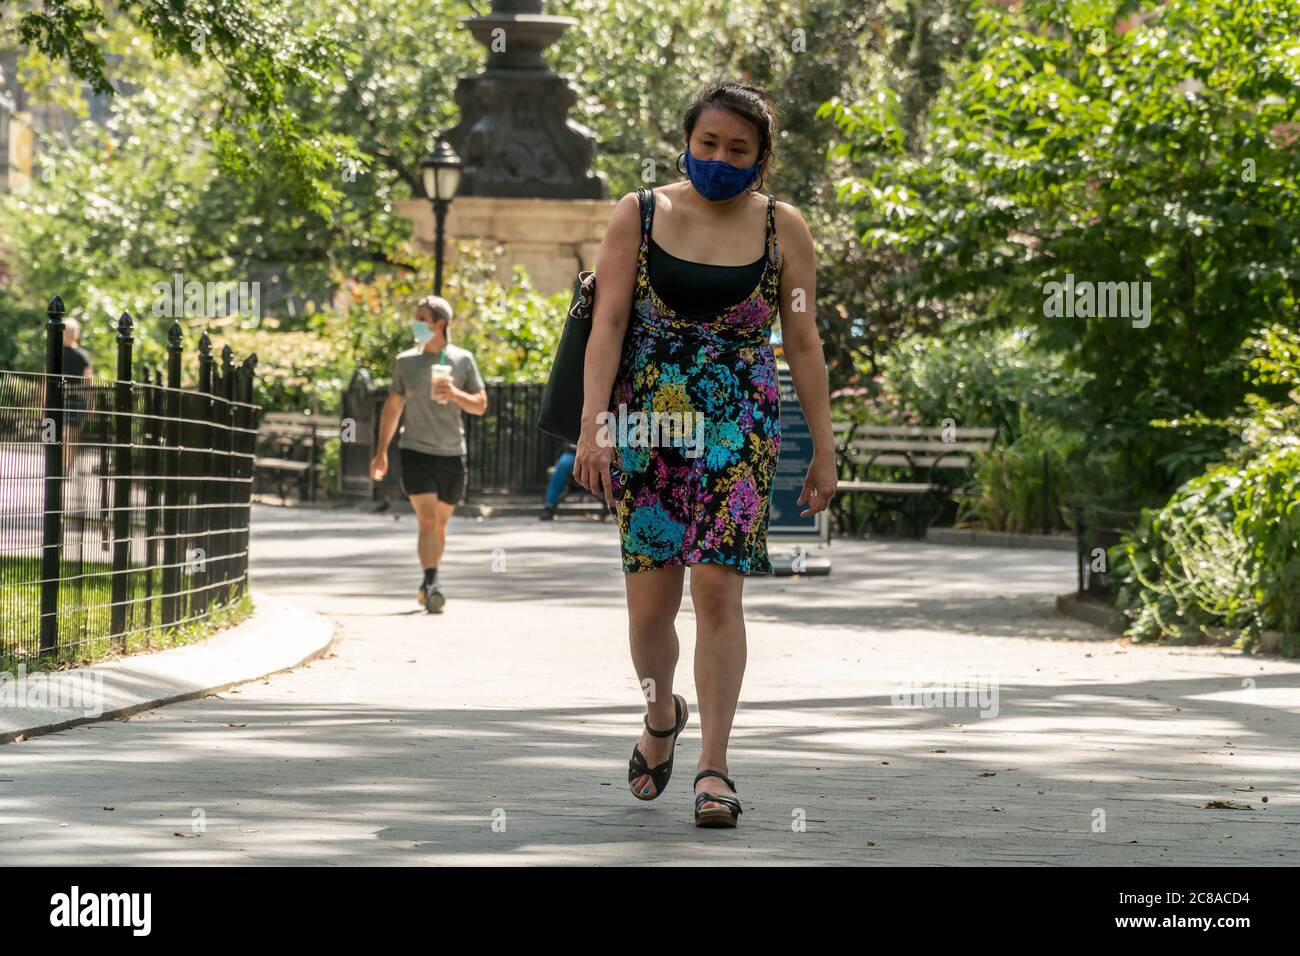 New Yorkers and visitors in Madison Square Park in New York on Monday, July 20, 2020. The city is suffering through mid-90s temperatures with Monday’s expected “real-feel” temperature passing 100 degrees. . (© Richard B. Levine) Stock Photo